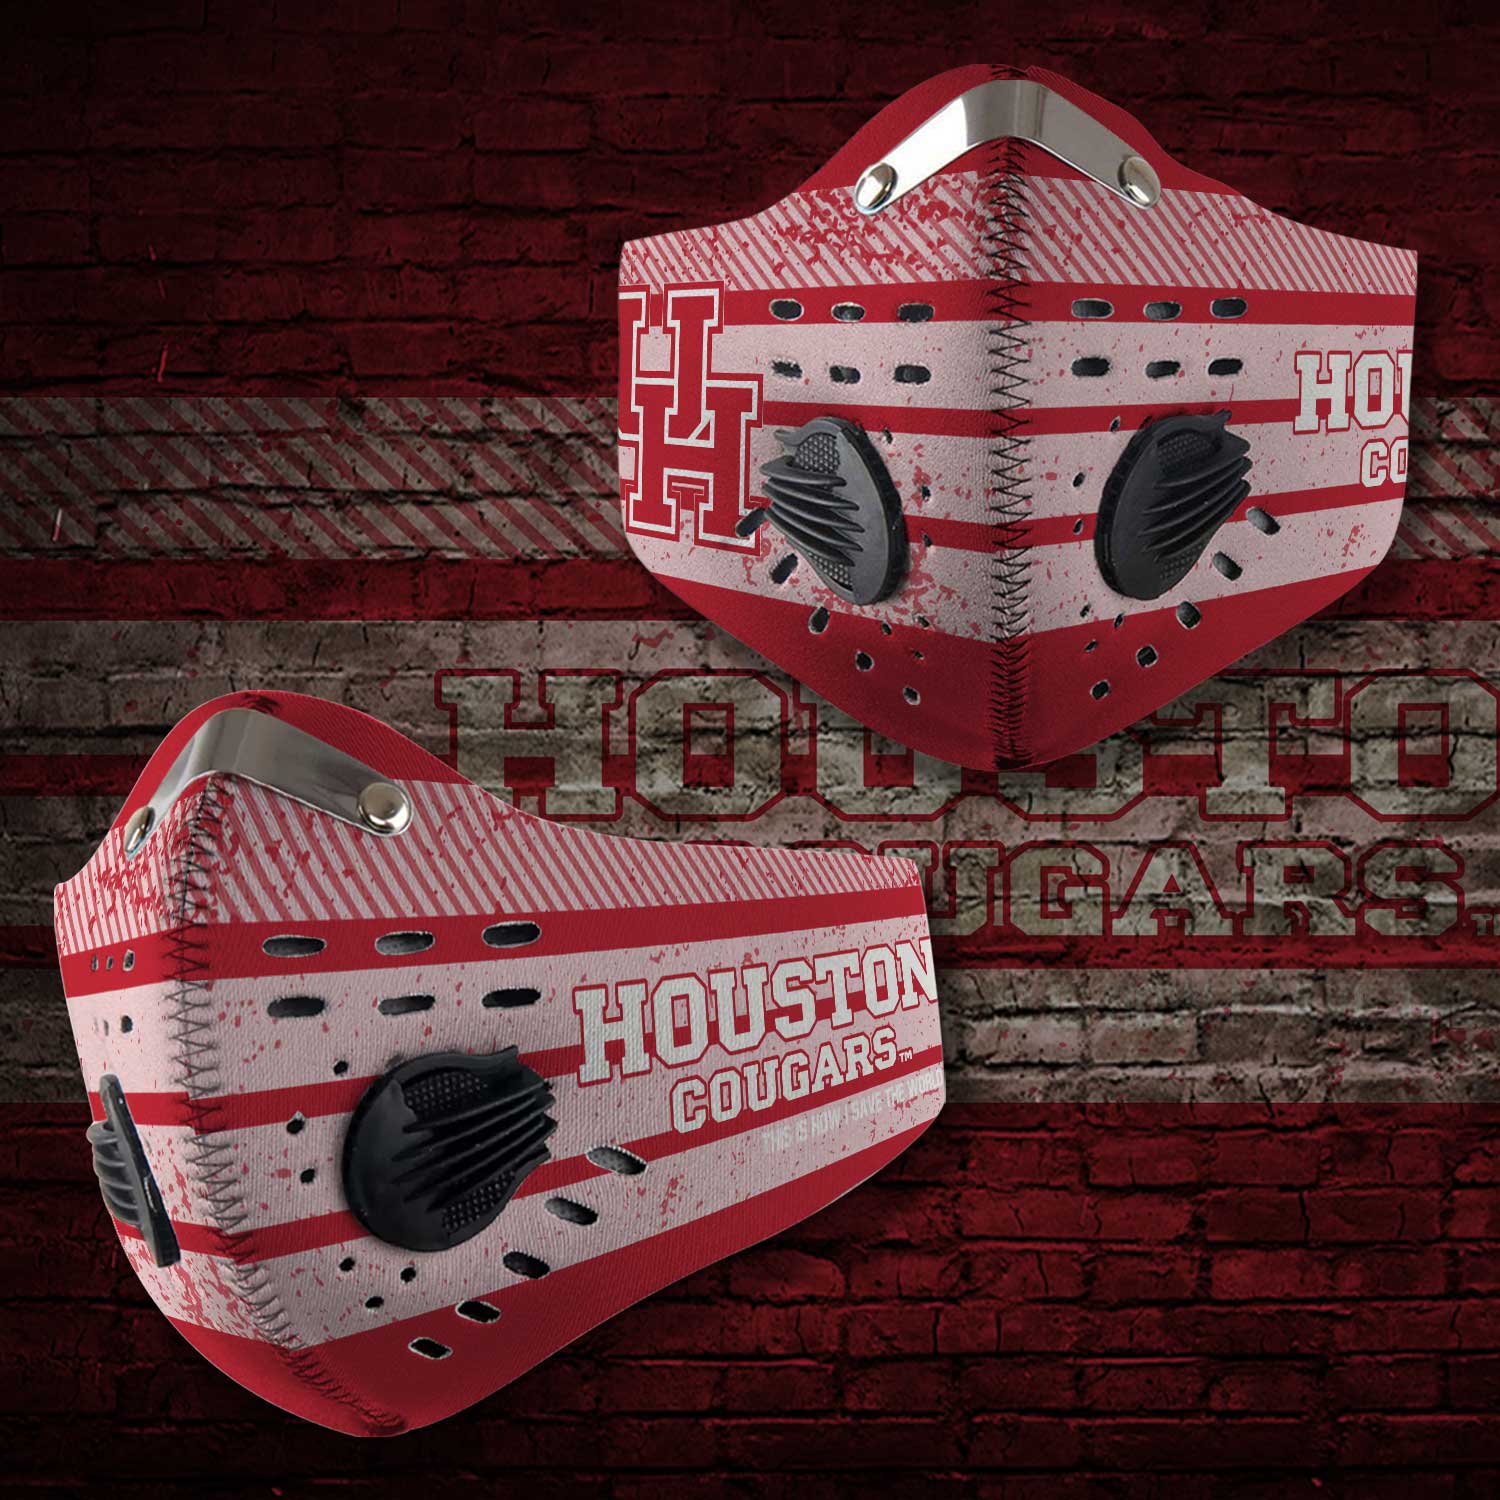 Houston cougars football this is how i save the world face mask